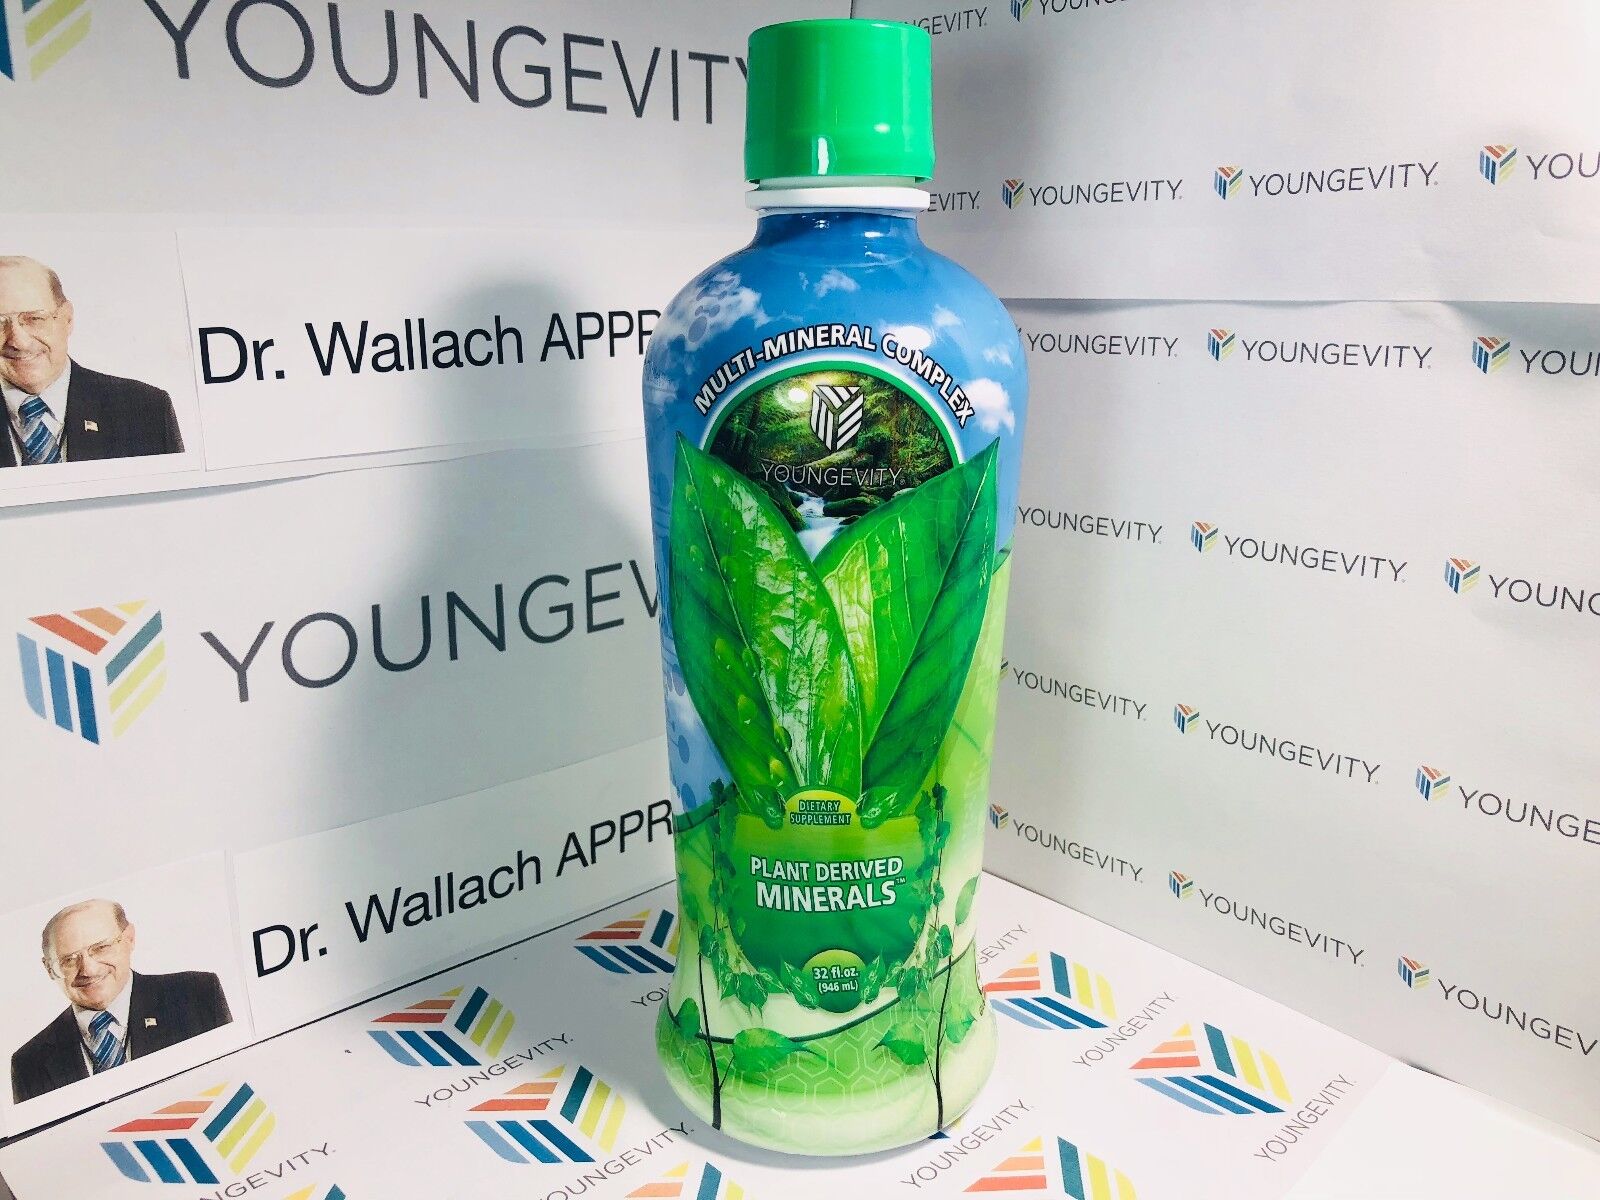 Plant Derived Minerals Dr. Wallach's Youngevity product BRAND NEW FRESH